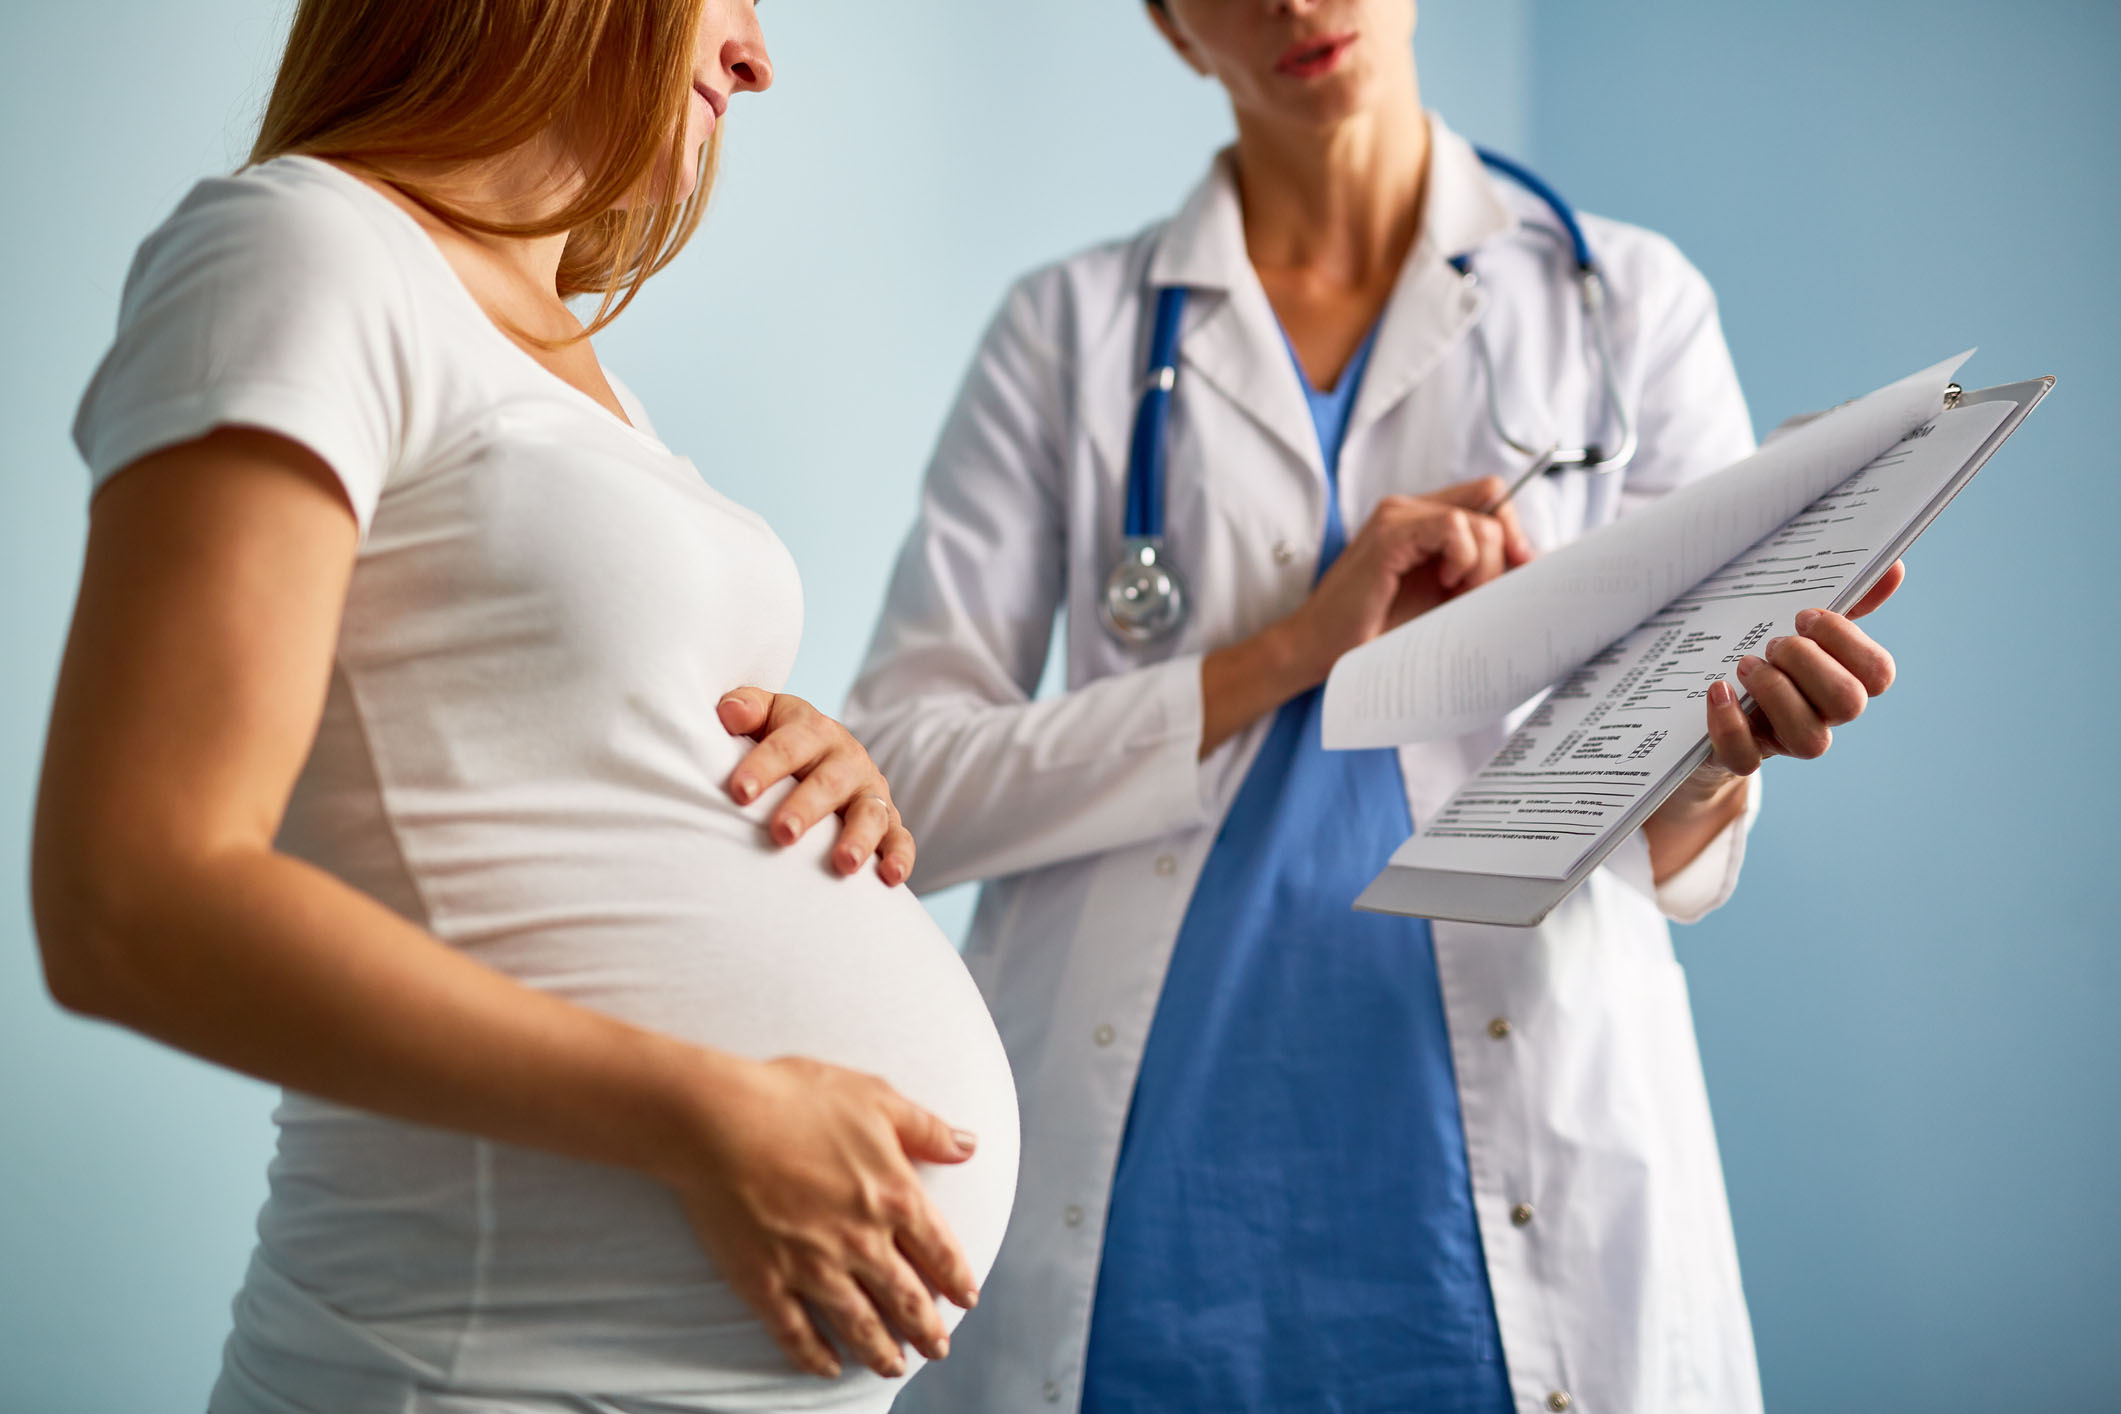 Image of a woman pregnant talking with doctor.